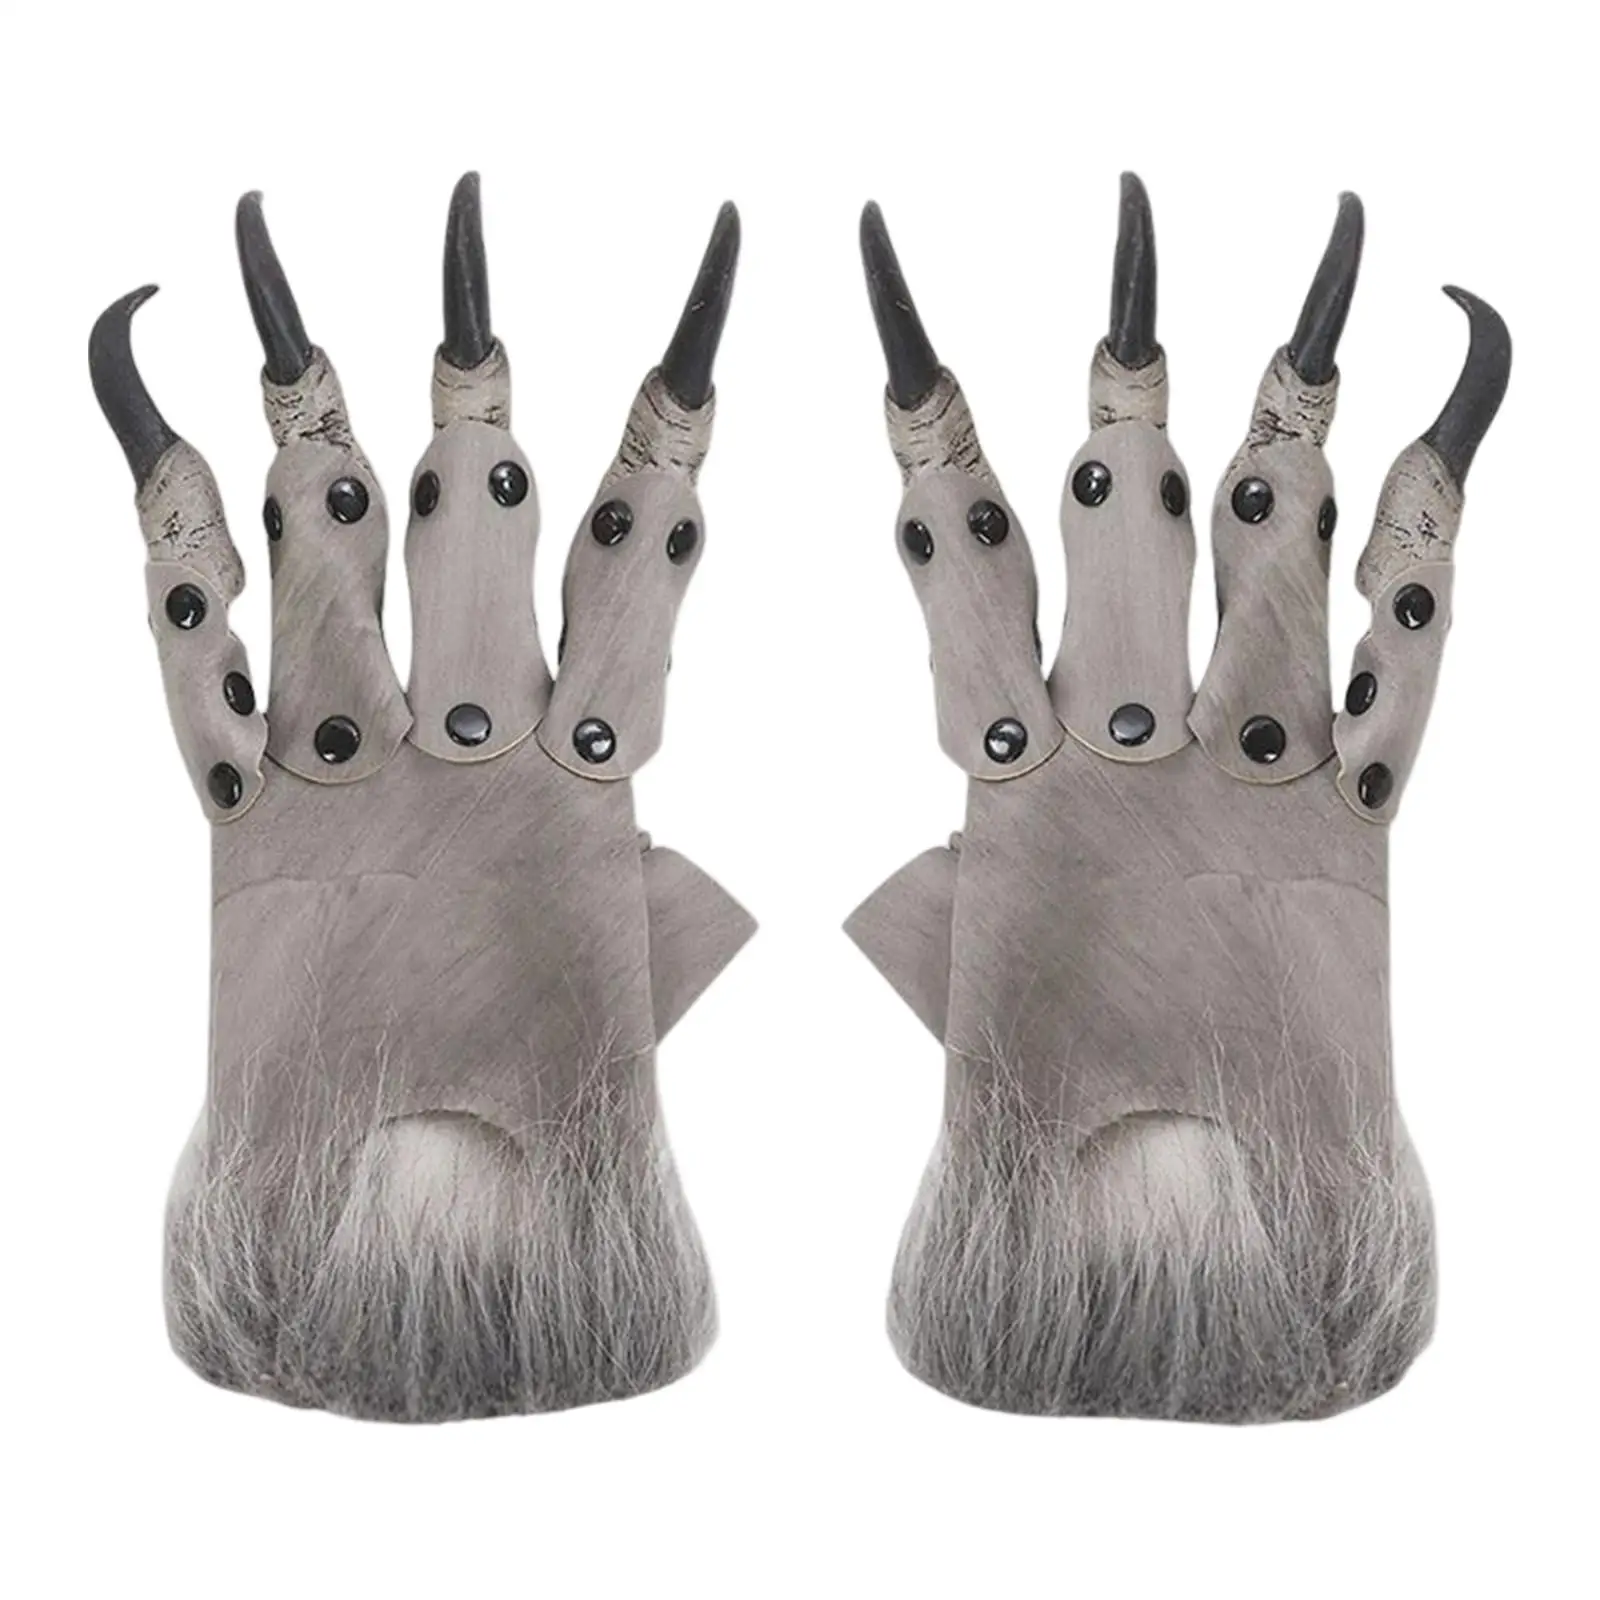 Creepy Halloween Dragon Glove Costume Claw Fancy Dress Easter Adult Mitts